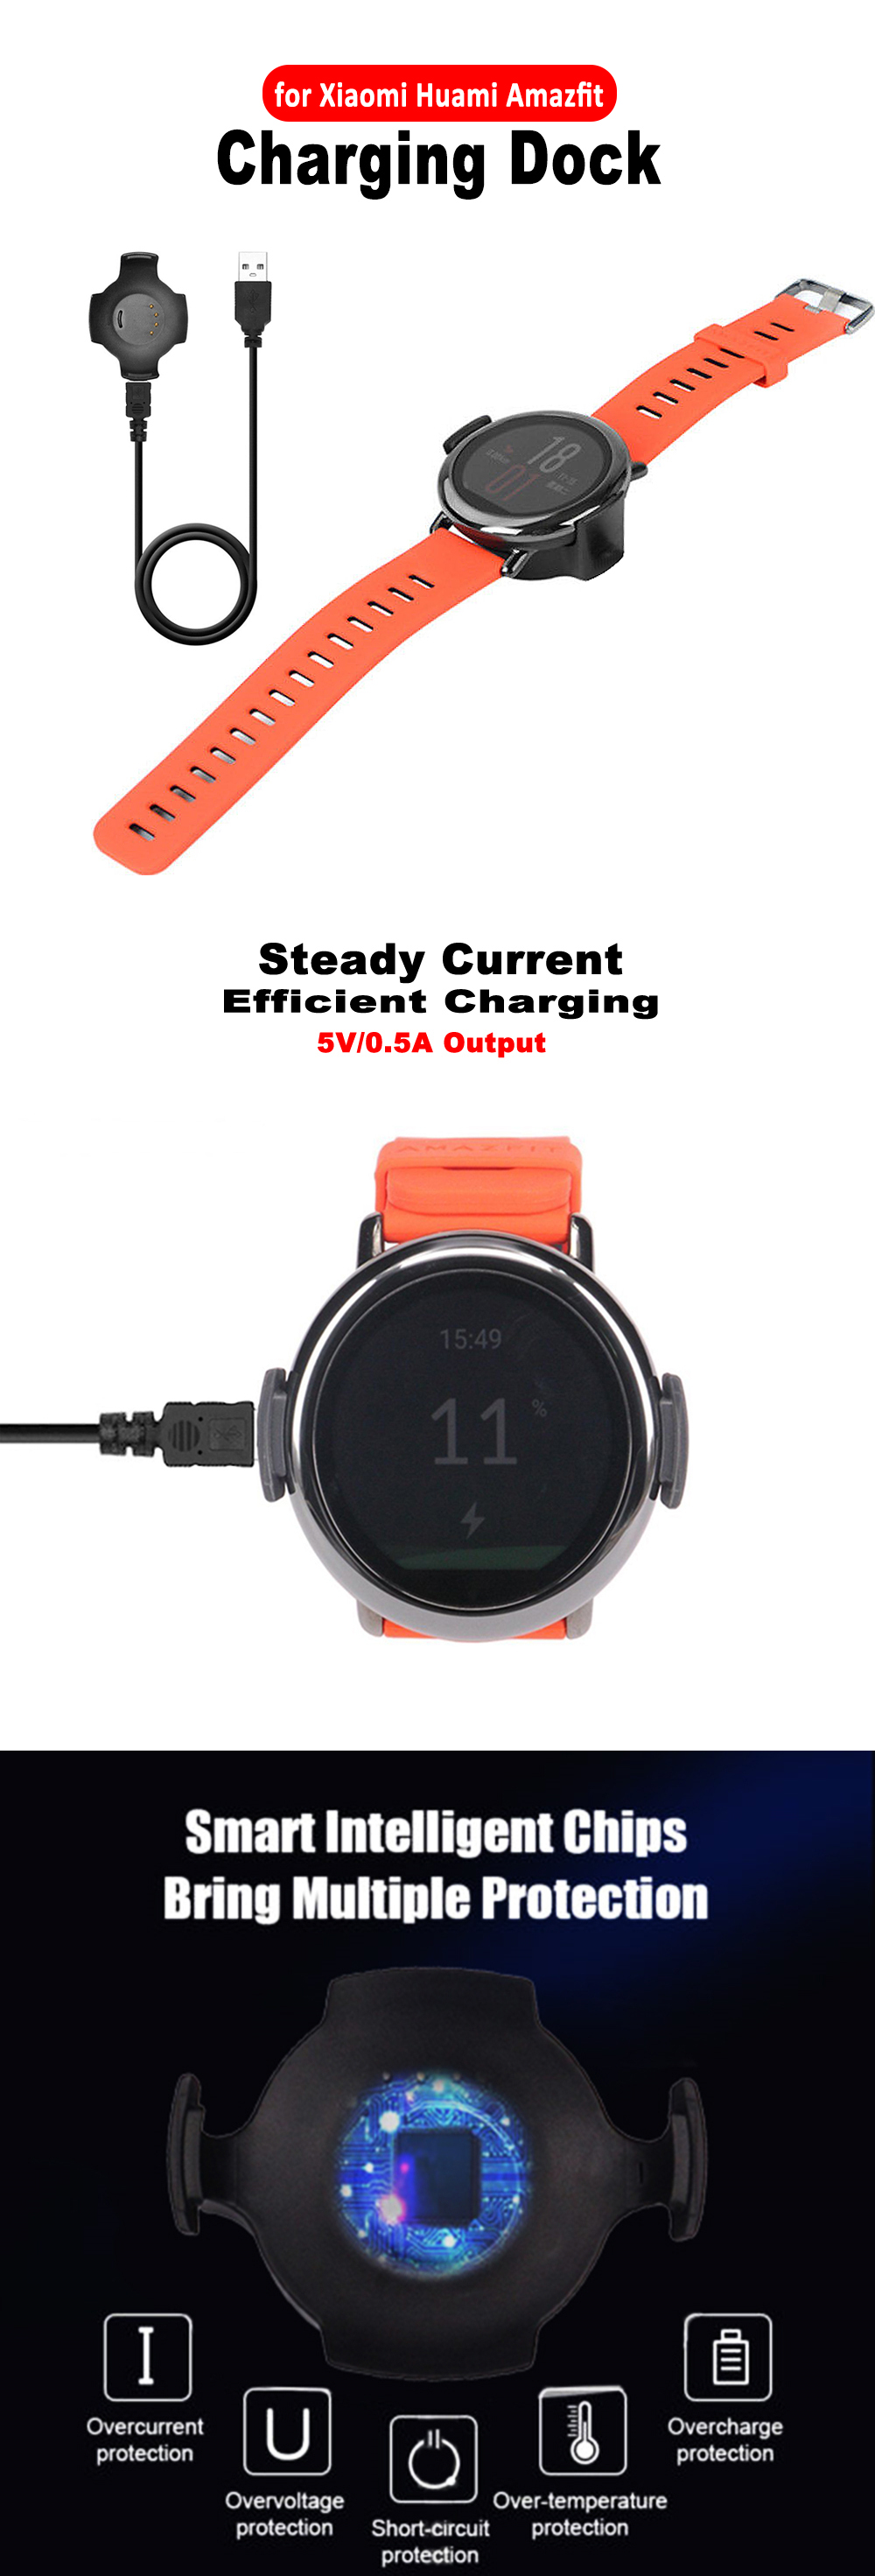 USB Fast Charger Charging Dock For Xiaomi Huami Amazfit Smartwatch